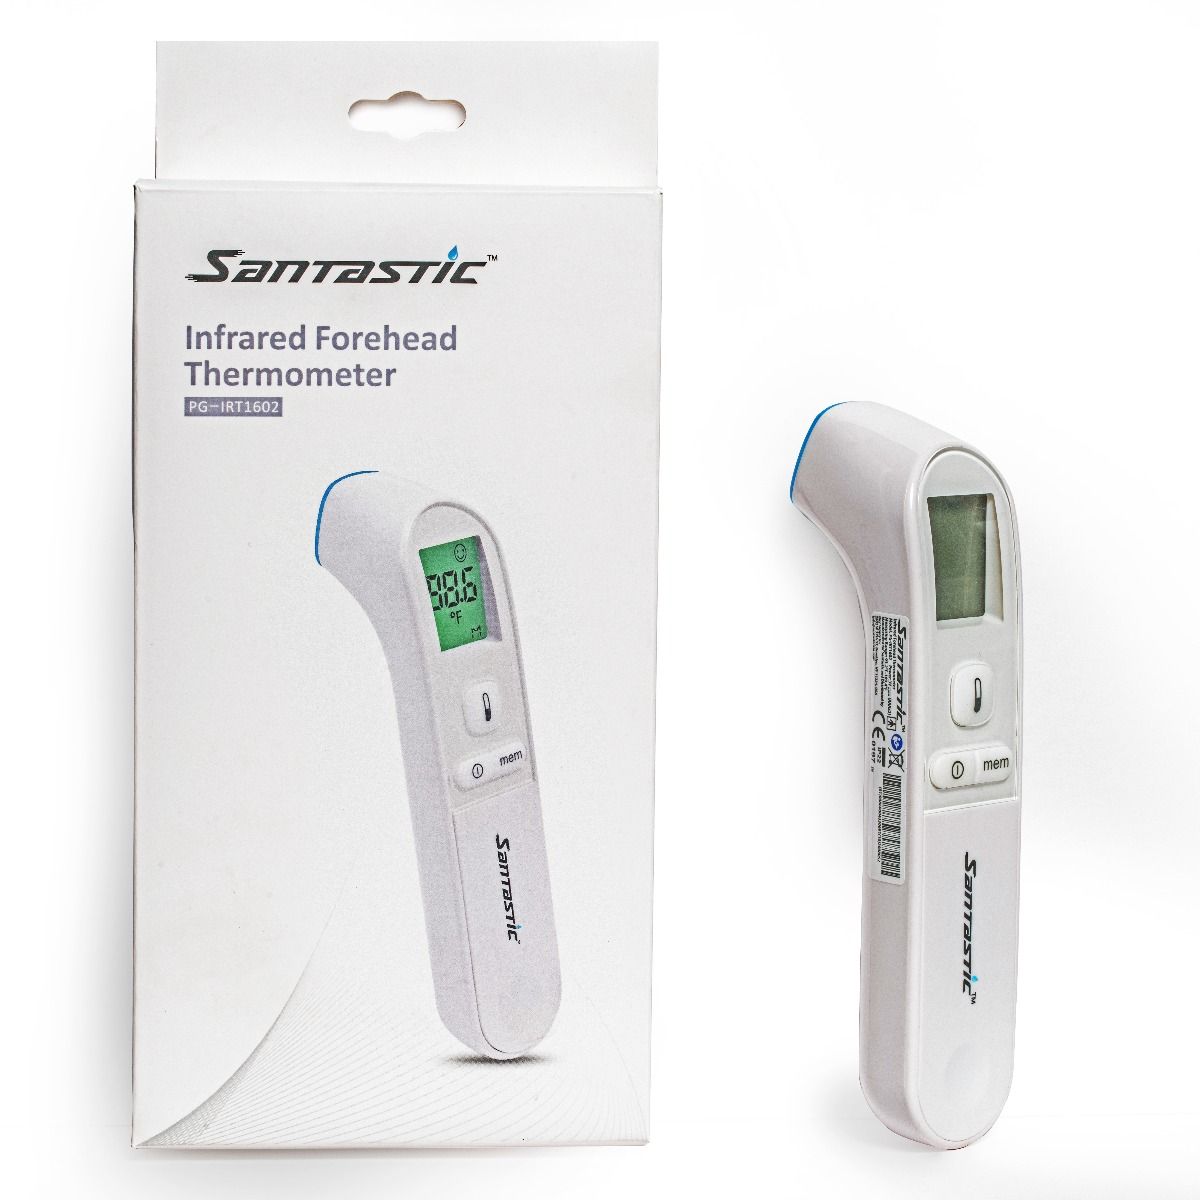 Santastic Infrared Forehead Thermometer